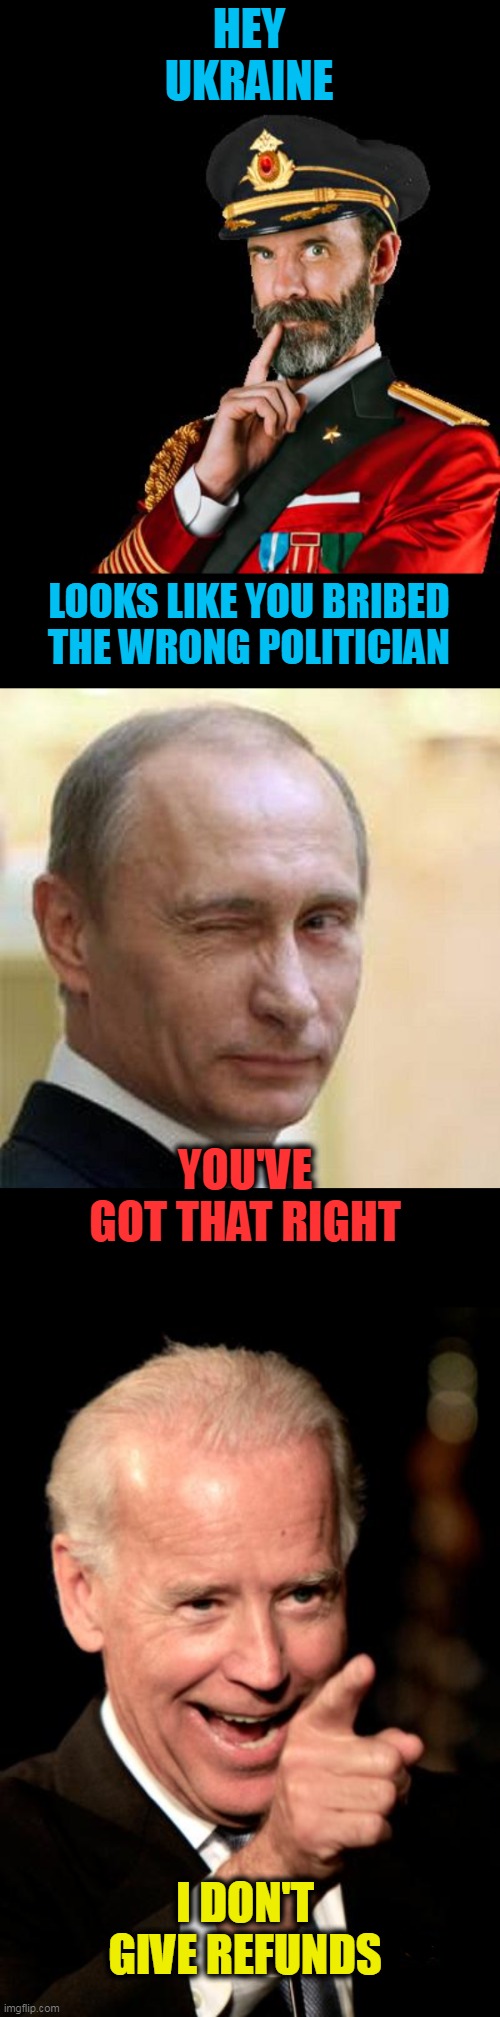 Bribem |  HEY UKRAINE; LOOKS LIKE YOU BRIBED THE WRONG POLITICIAN; YOU'VE GOT THAT RIGHT; I DON'T GIVE REFUNDS | image tagged in captain obvious,putin winking,memes,smilin biden,ukraine | made w/ Imgflip meme maker